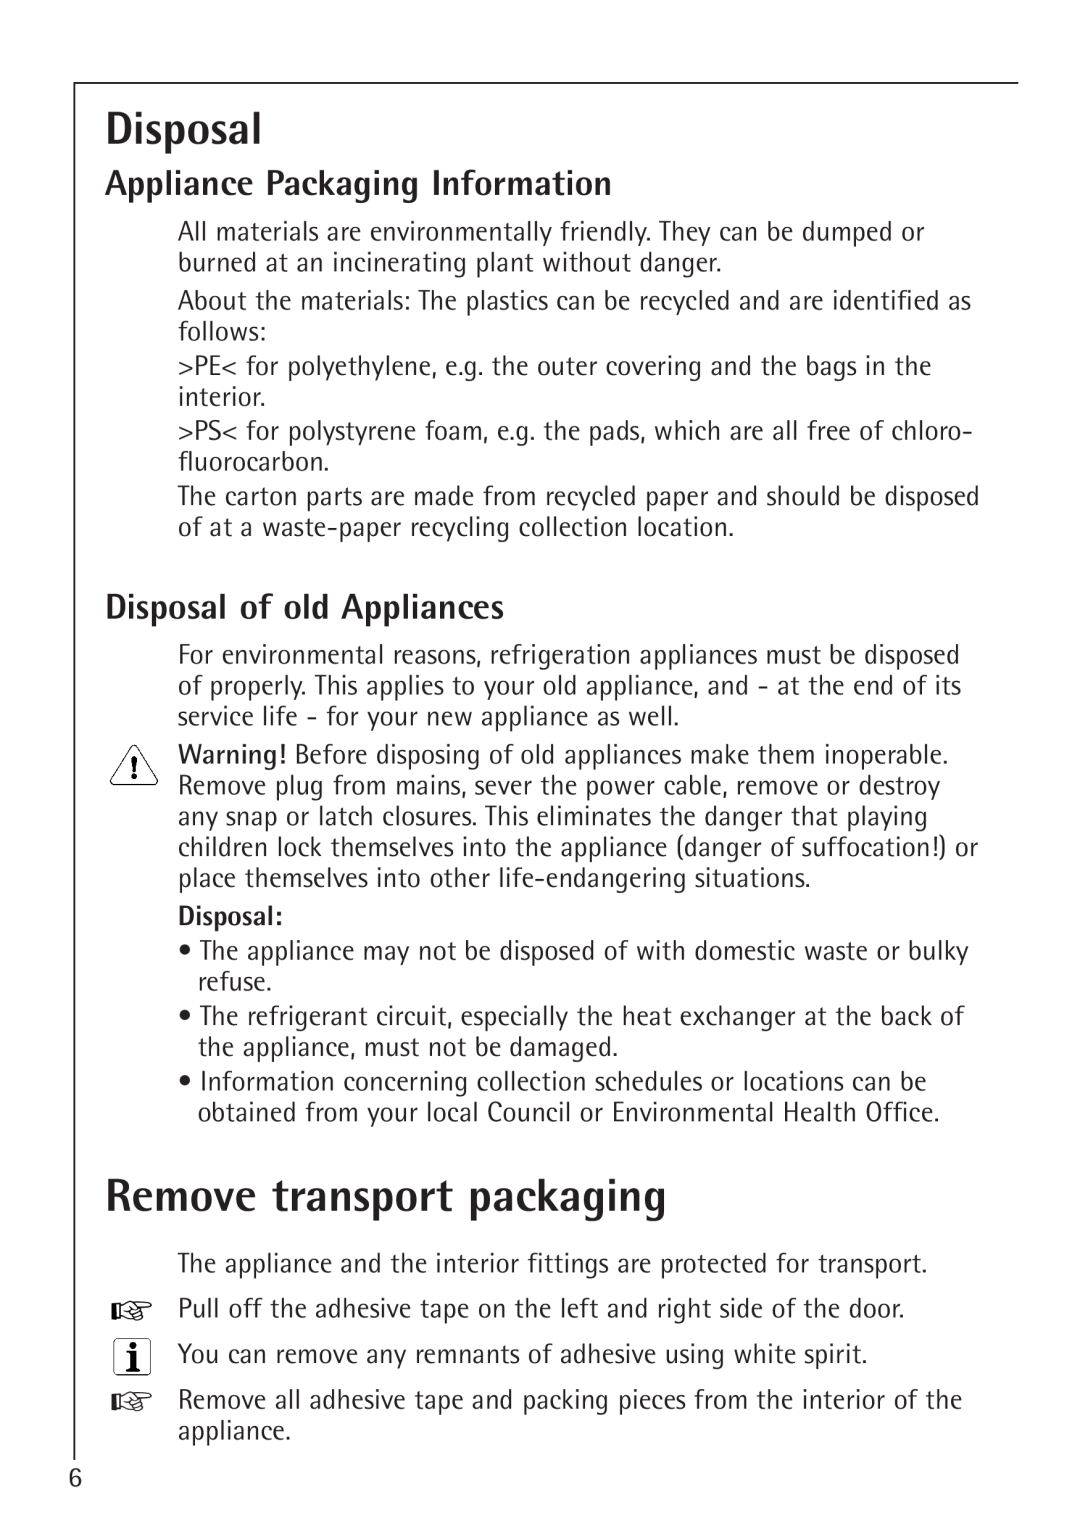 Electrolux 66050i Remove transport packaging, Appliance Packaging Information, Disposal of old Appliances 